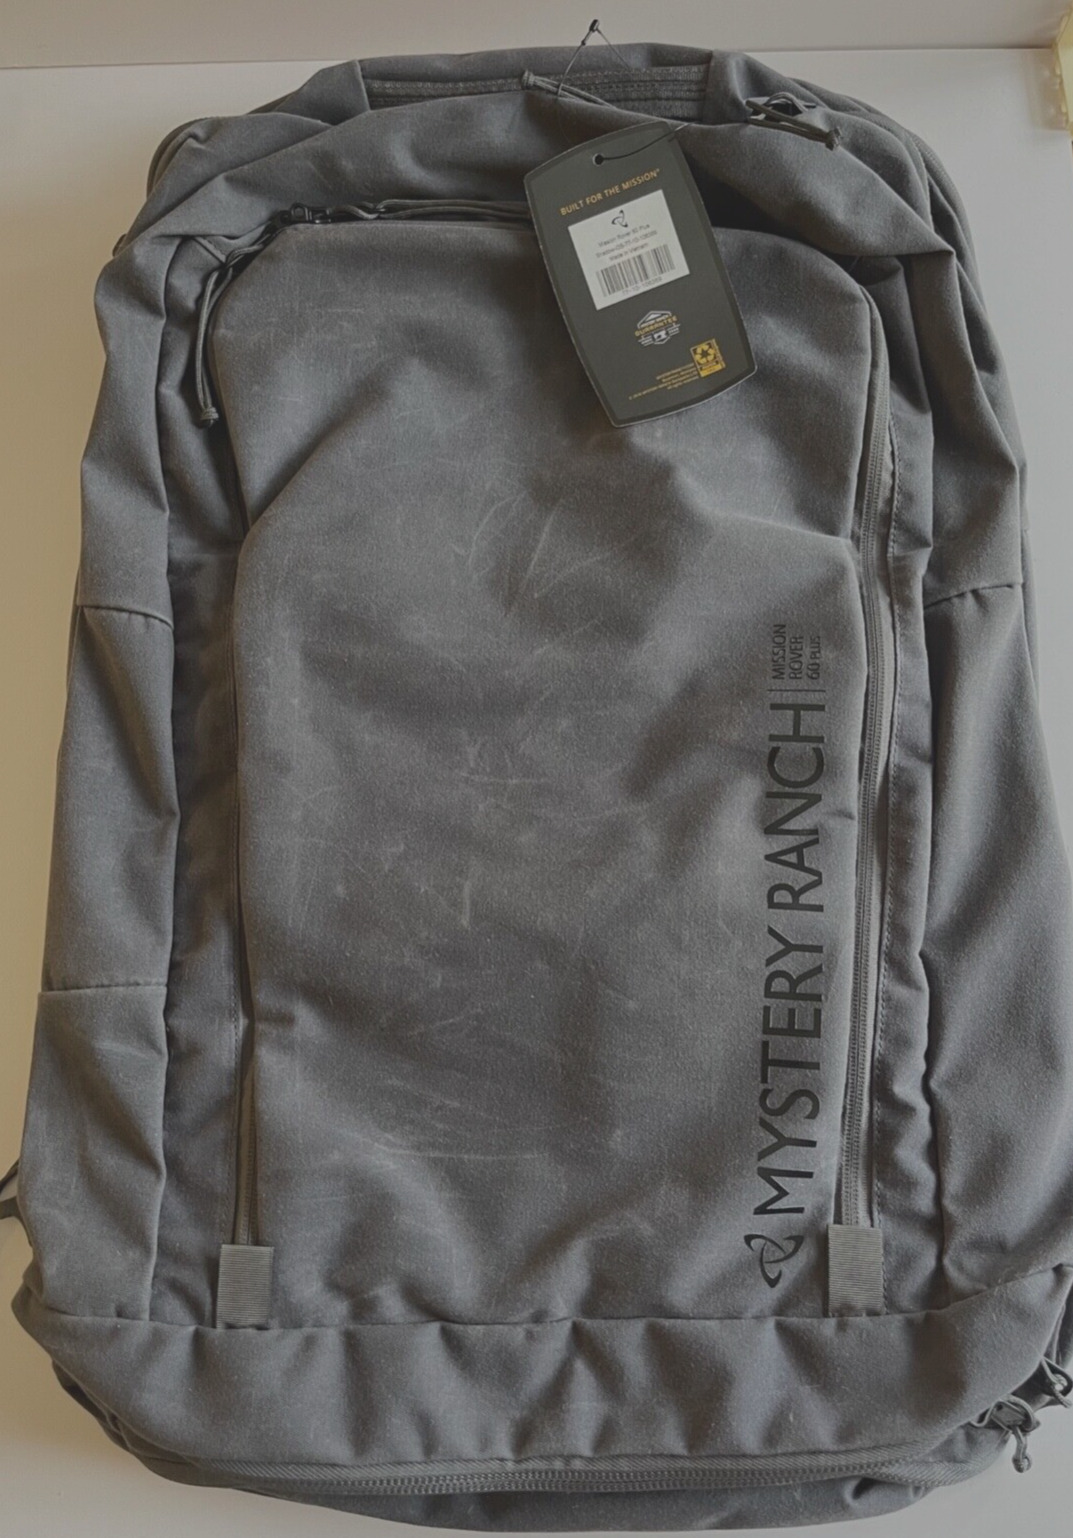  *NEW WITH TAGS* MYSTERY RANCH Mission Rover 60L+ backpack \